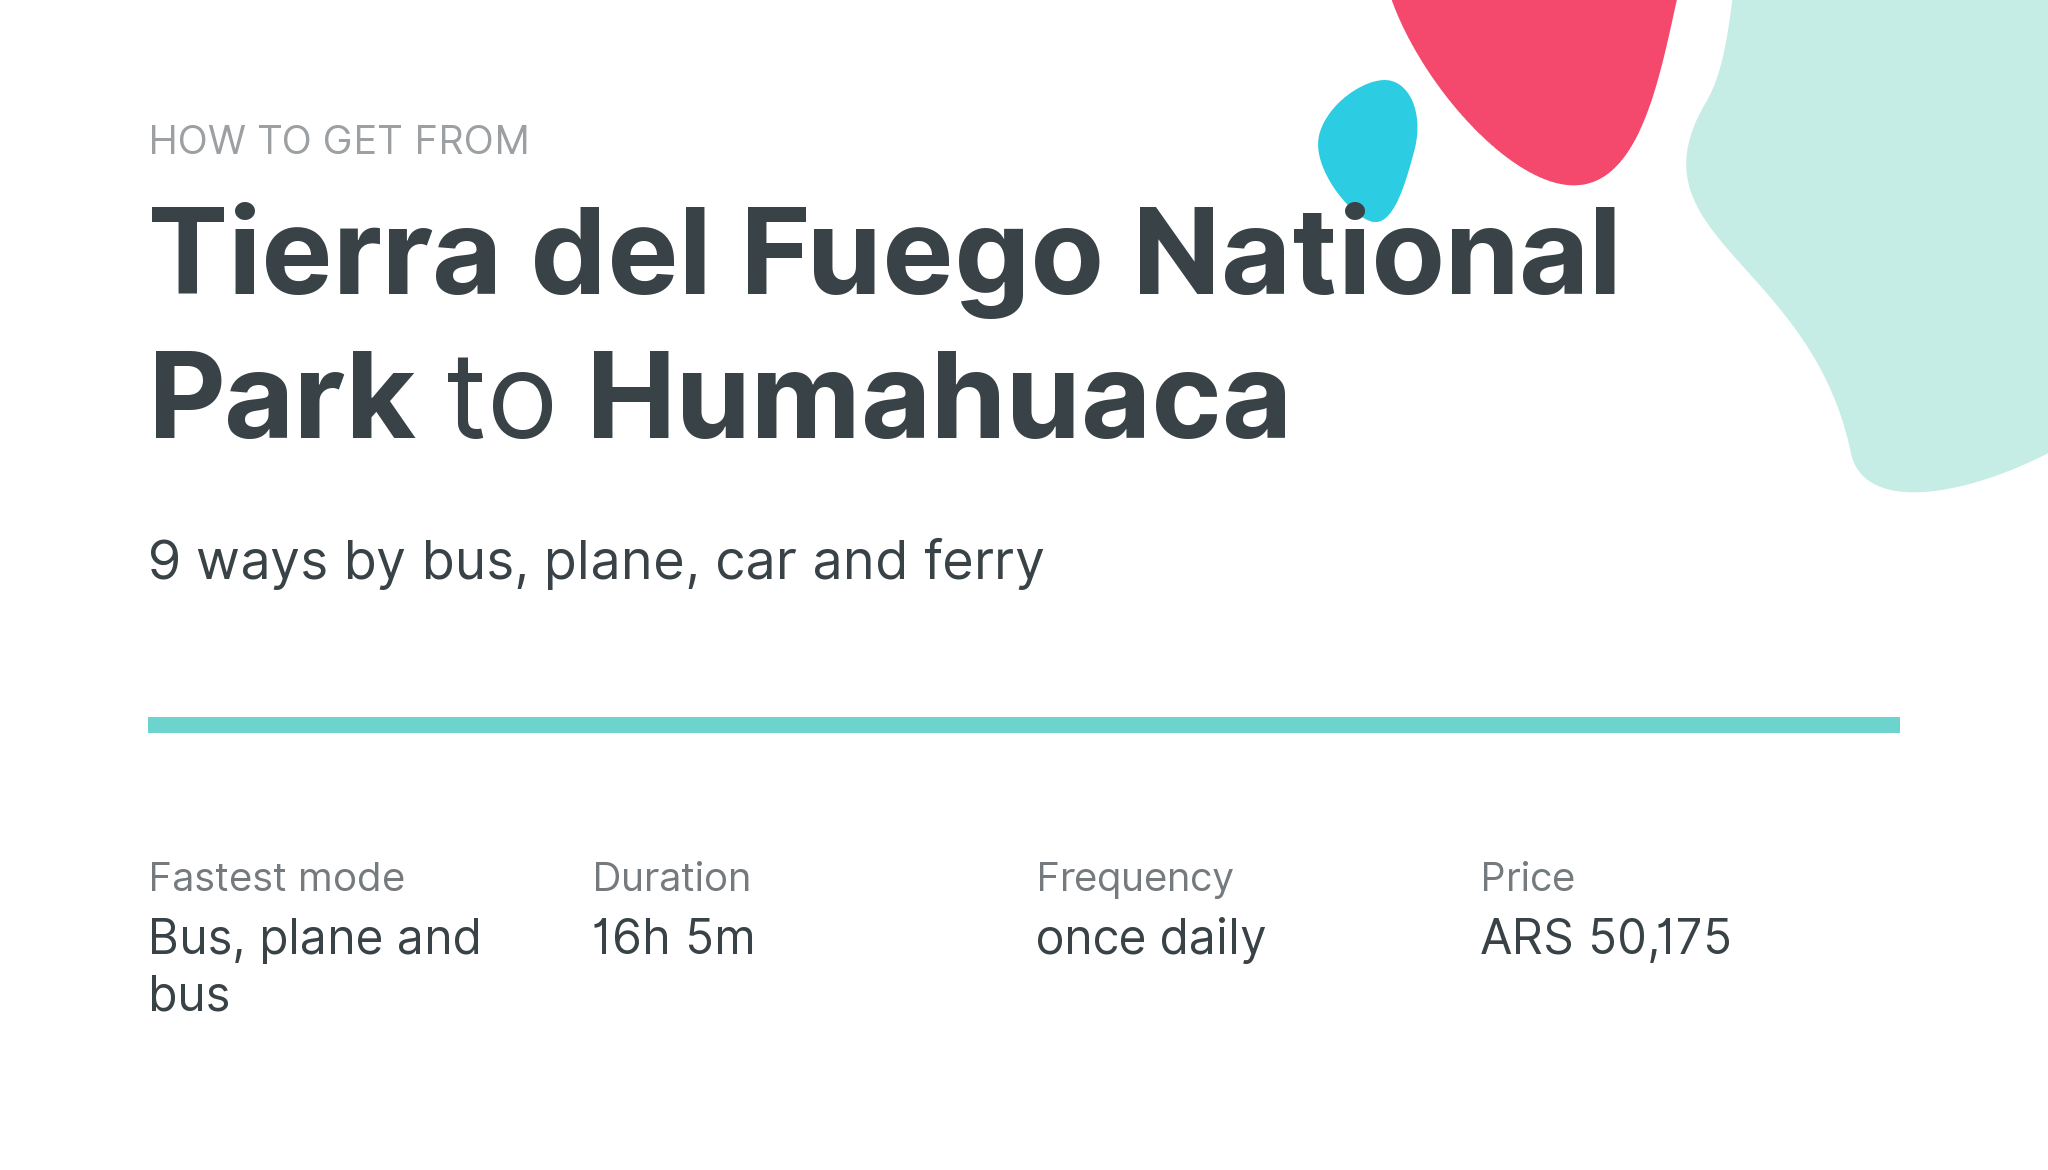 How do I get from Tierra del Fuego National Park to Humahuaca